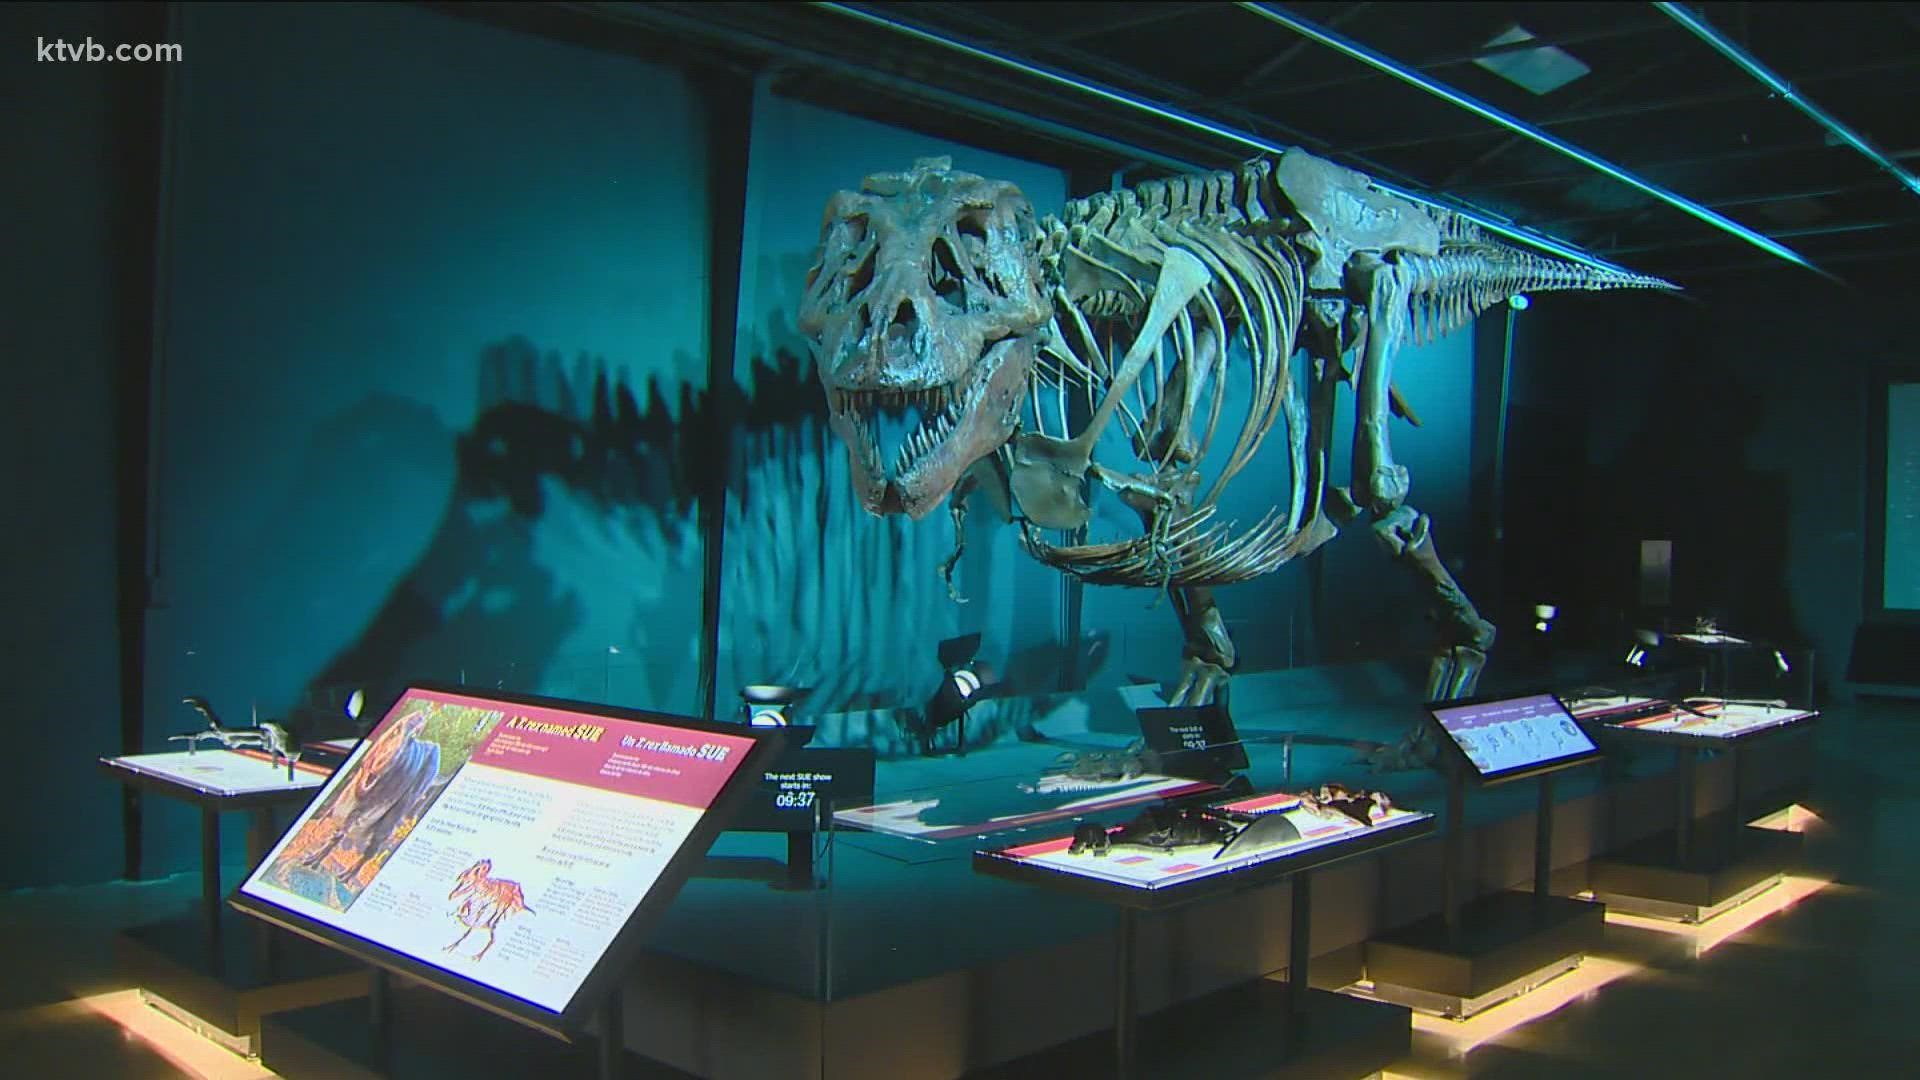 A new exhibit opens Friday featuring the most complete T-rex ever discovered.